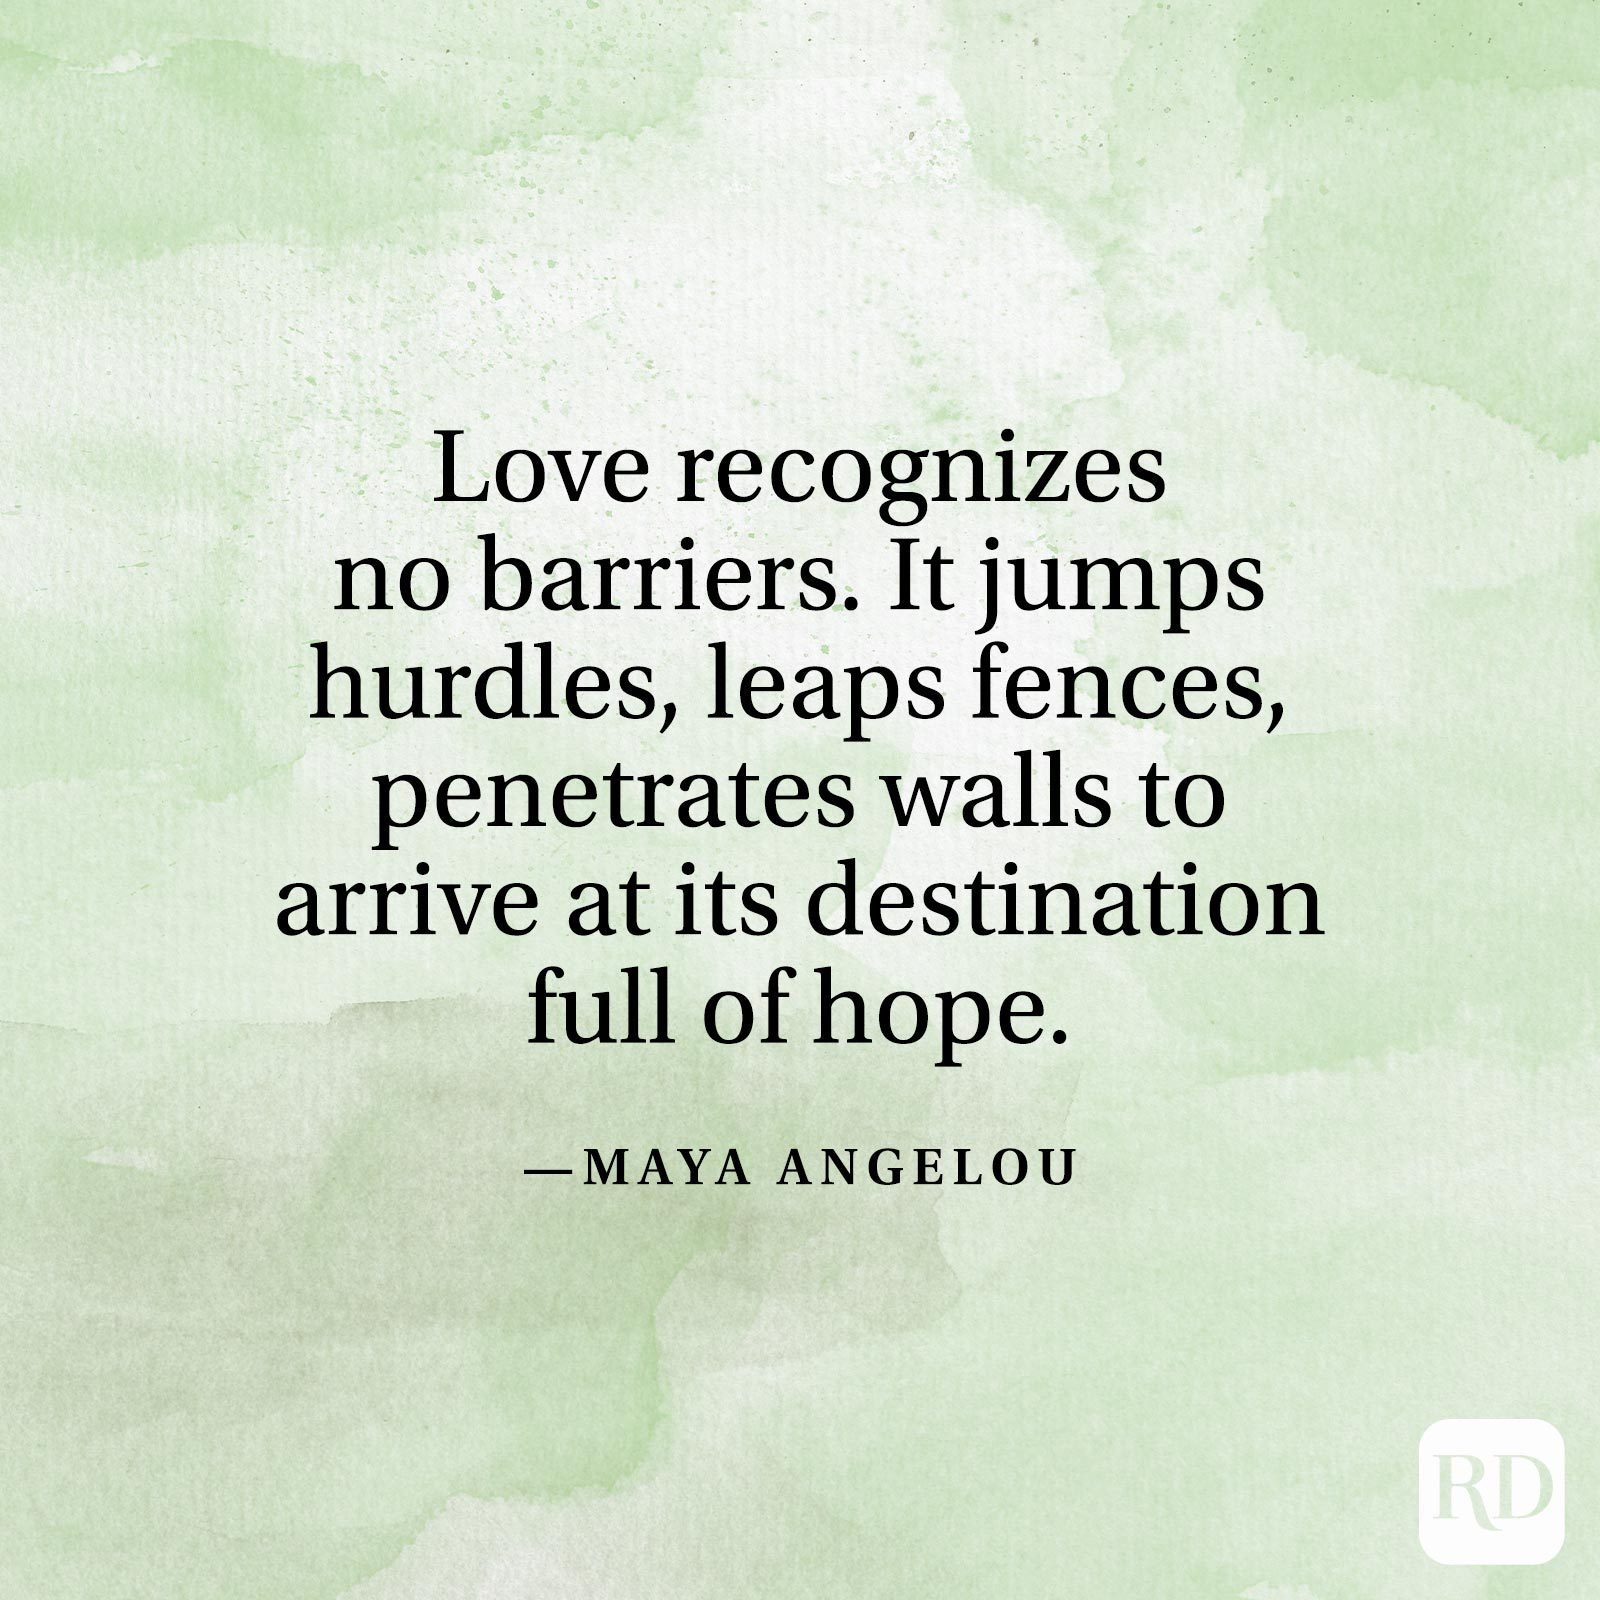 "Love recognizes no barriers. It jumps hurdles, leaps fences, penetrates walls to arrive at its destination full of hope." —Maya Angelou